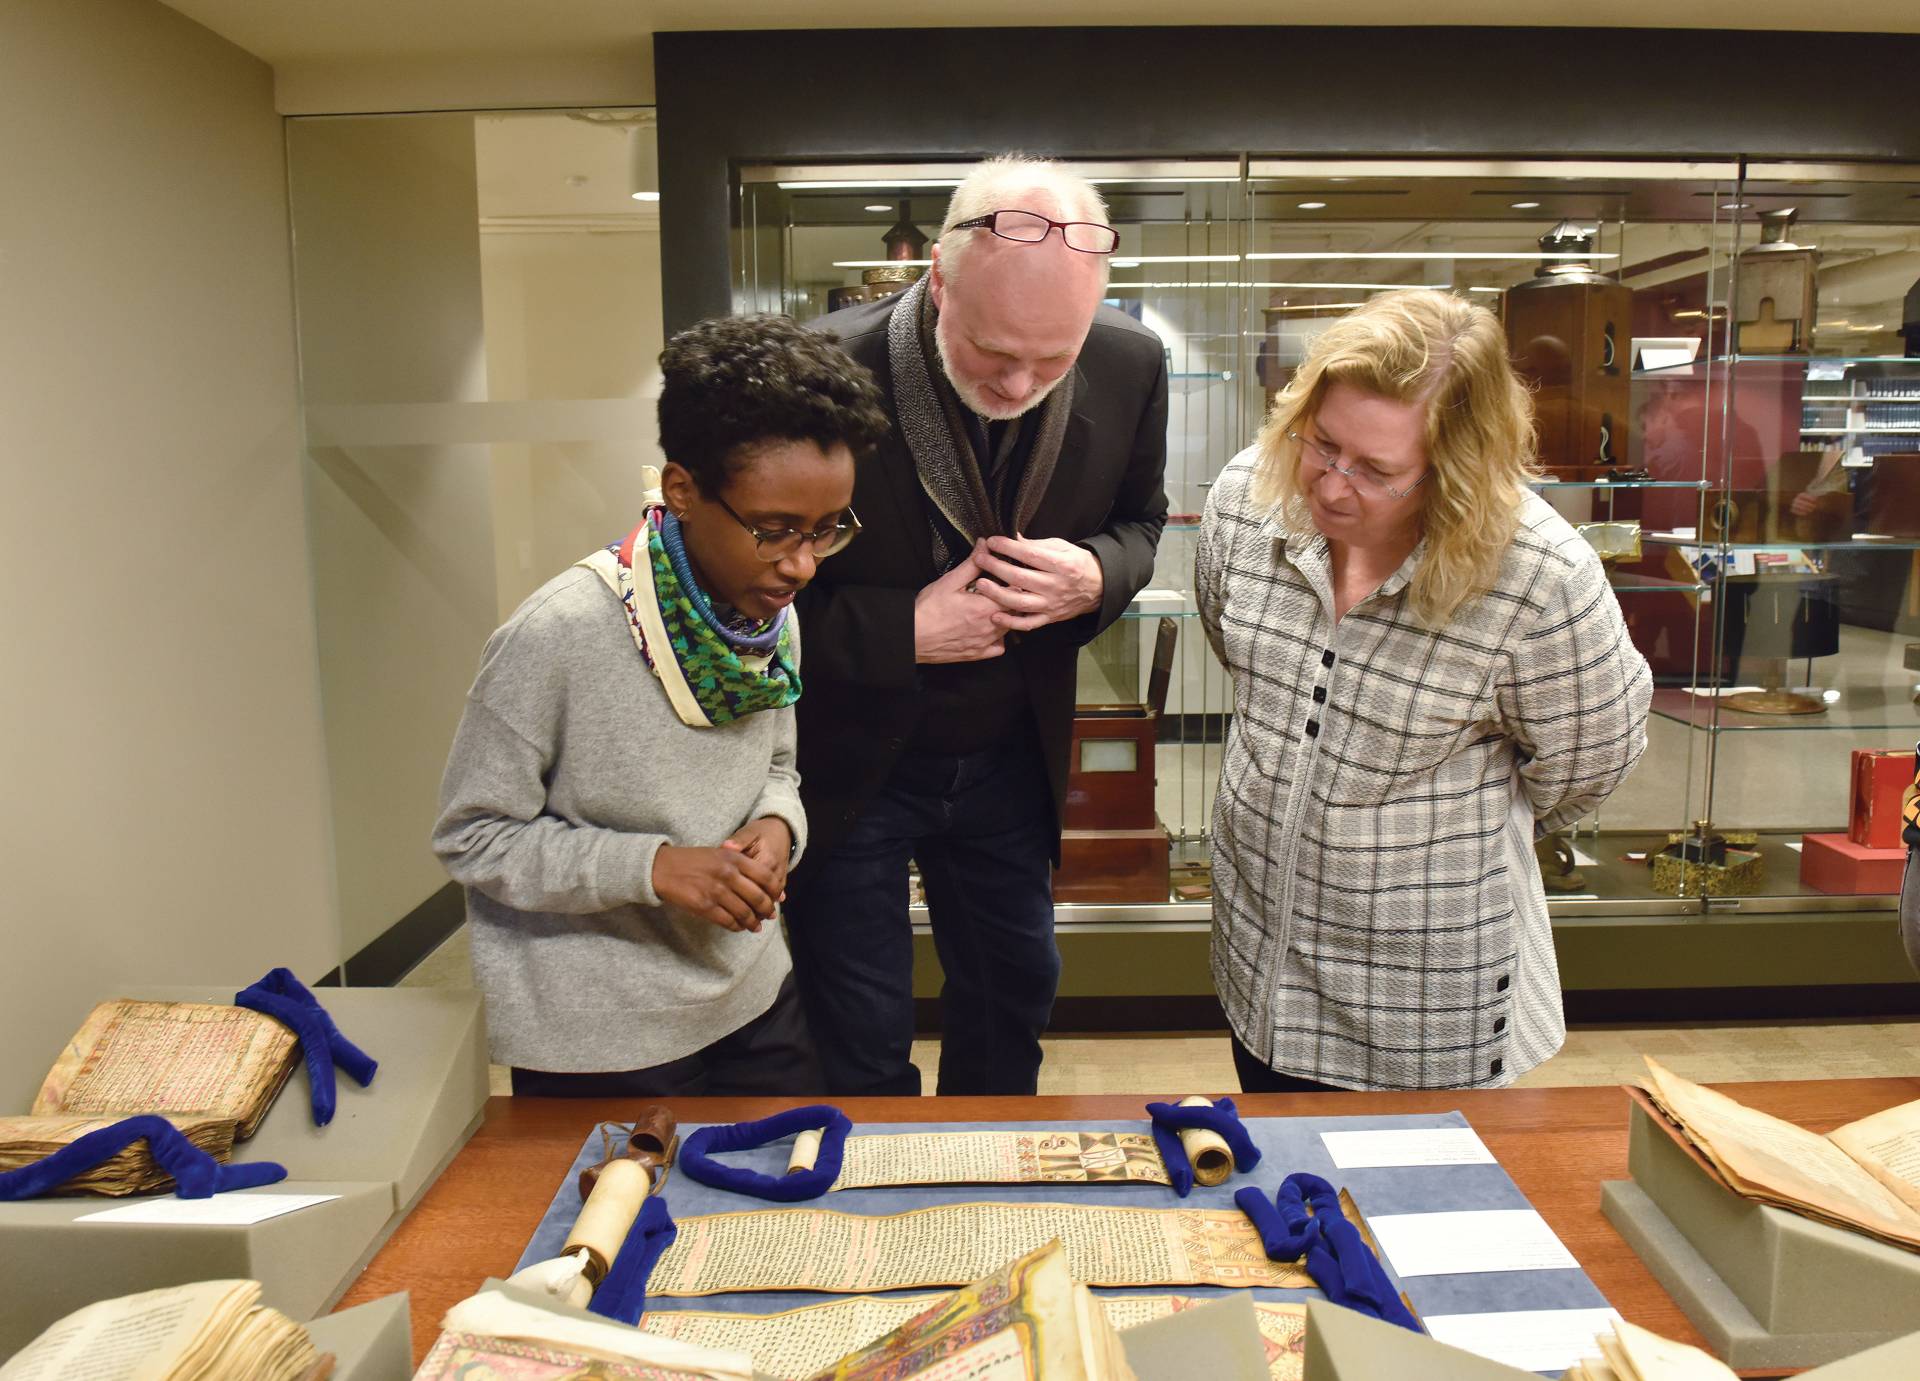 Meseret Oldjira, Michael Kleiner, and Wendy Belcher, looking at and discussing a manuscript on a table display.